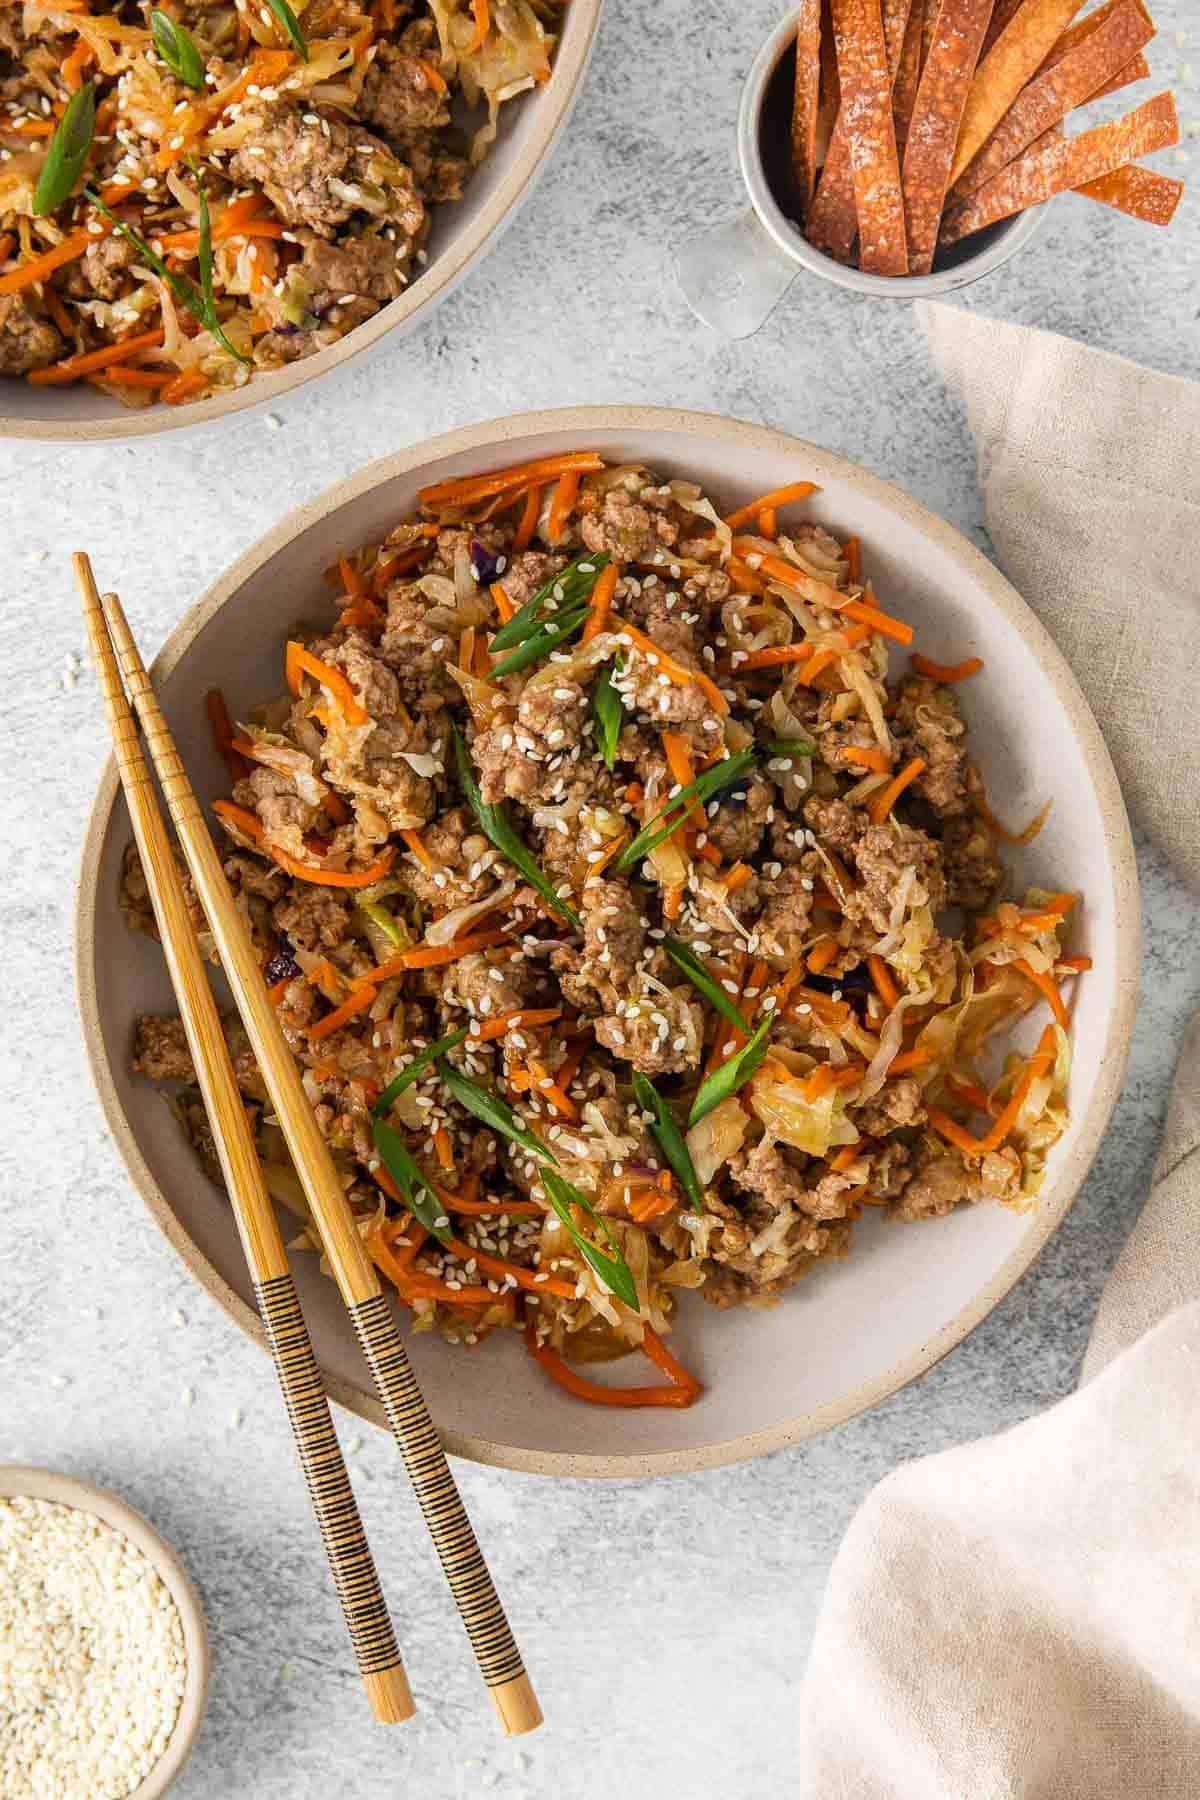 A bowl of asian fried rice with carrots and meat.